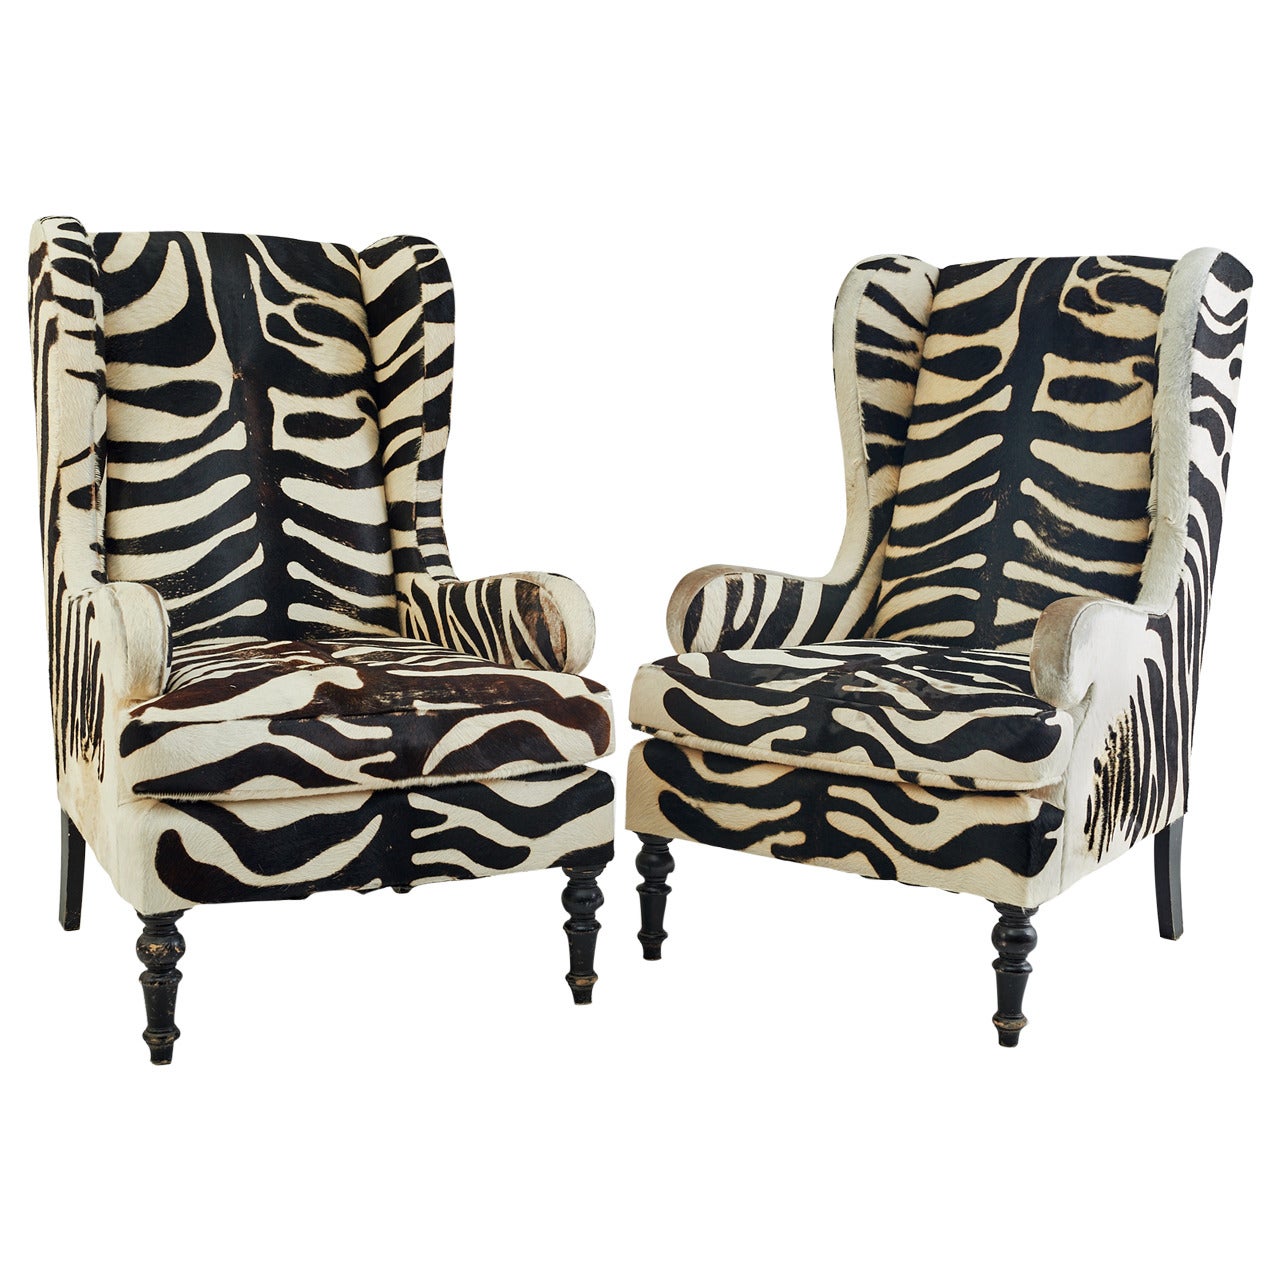 20th Century Faux Zebra Wingback Chairs